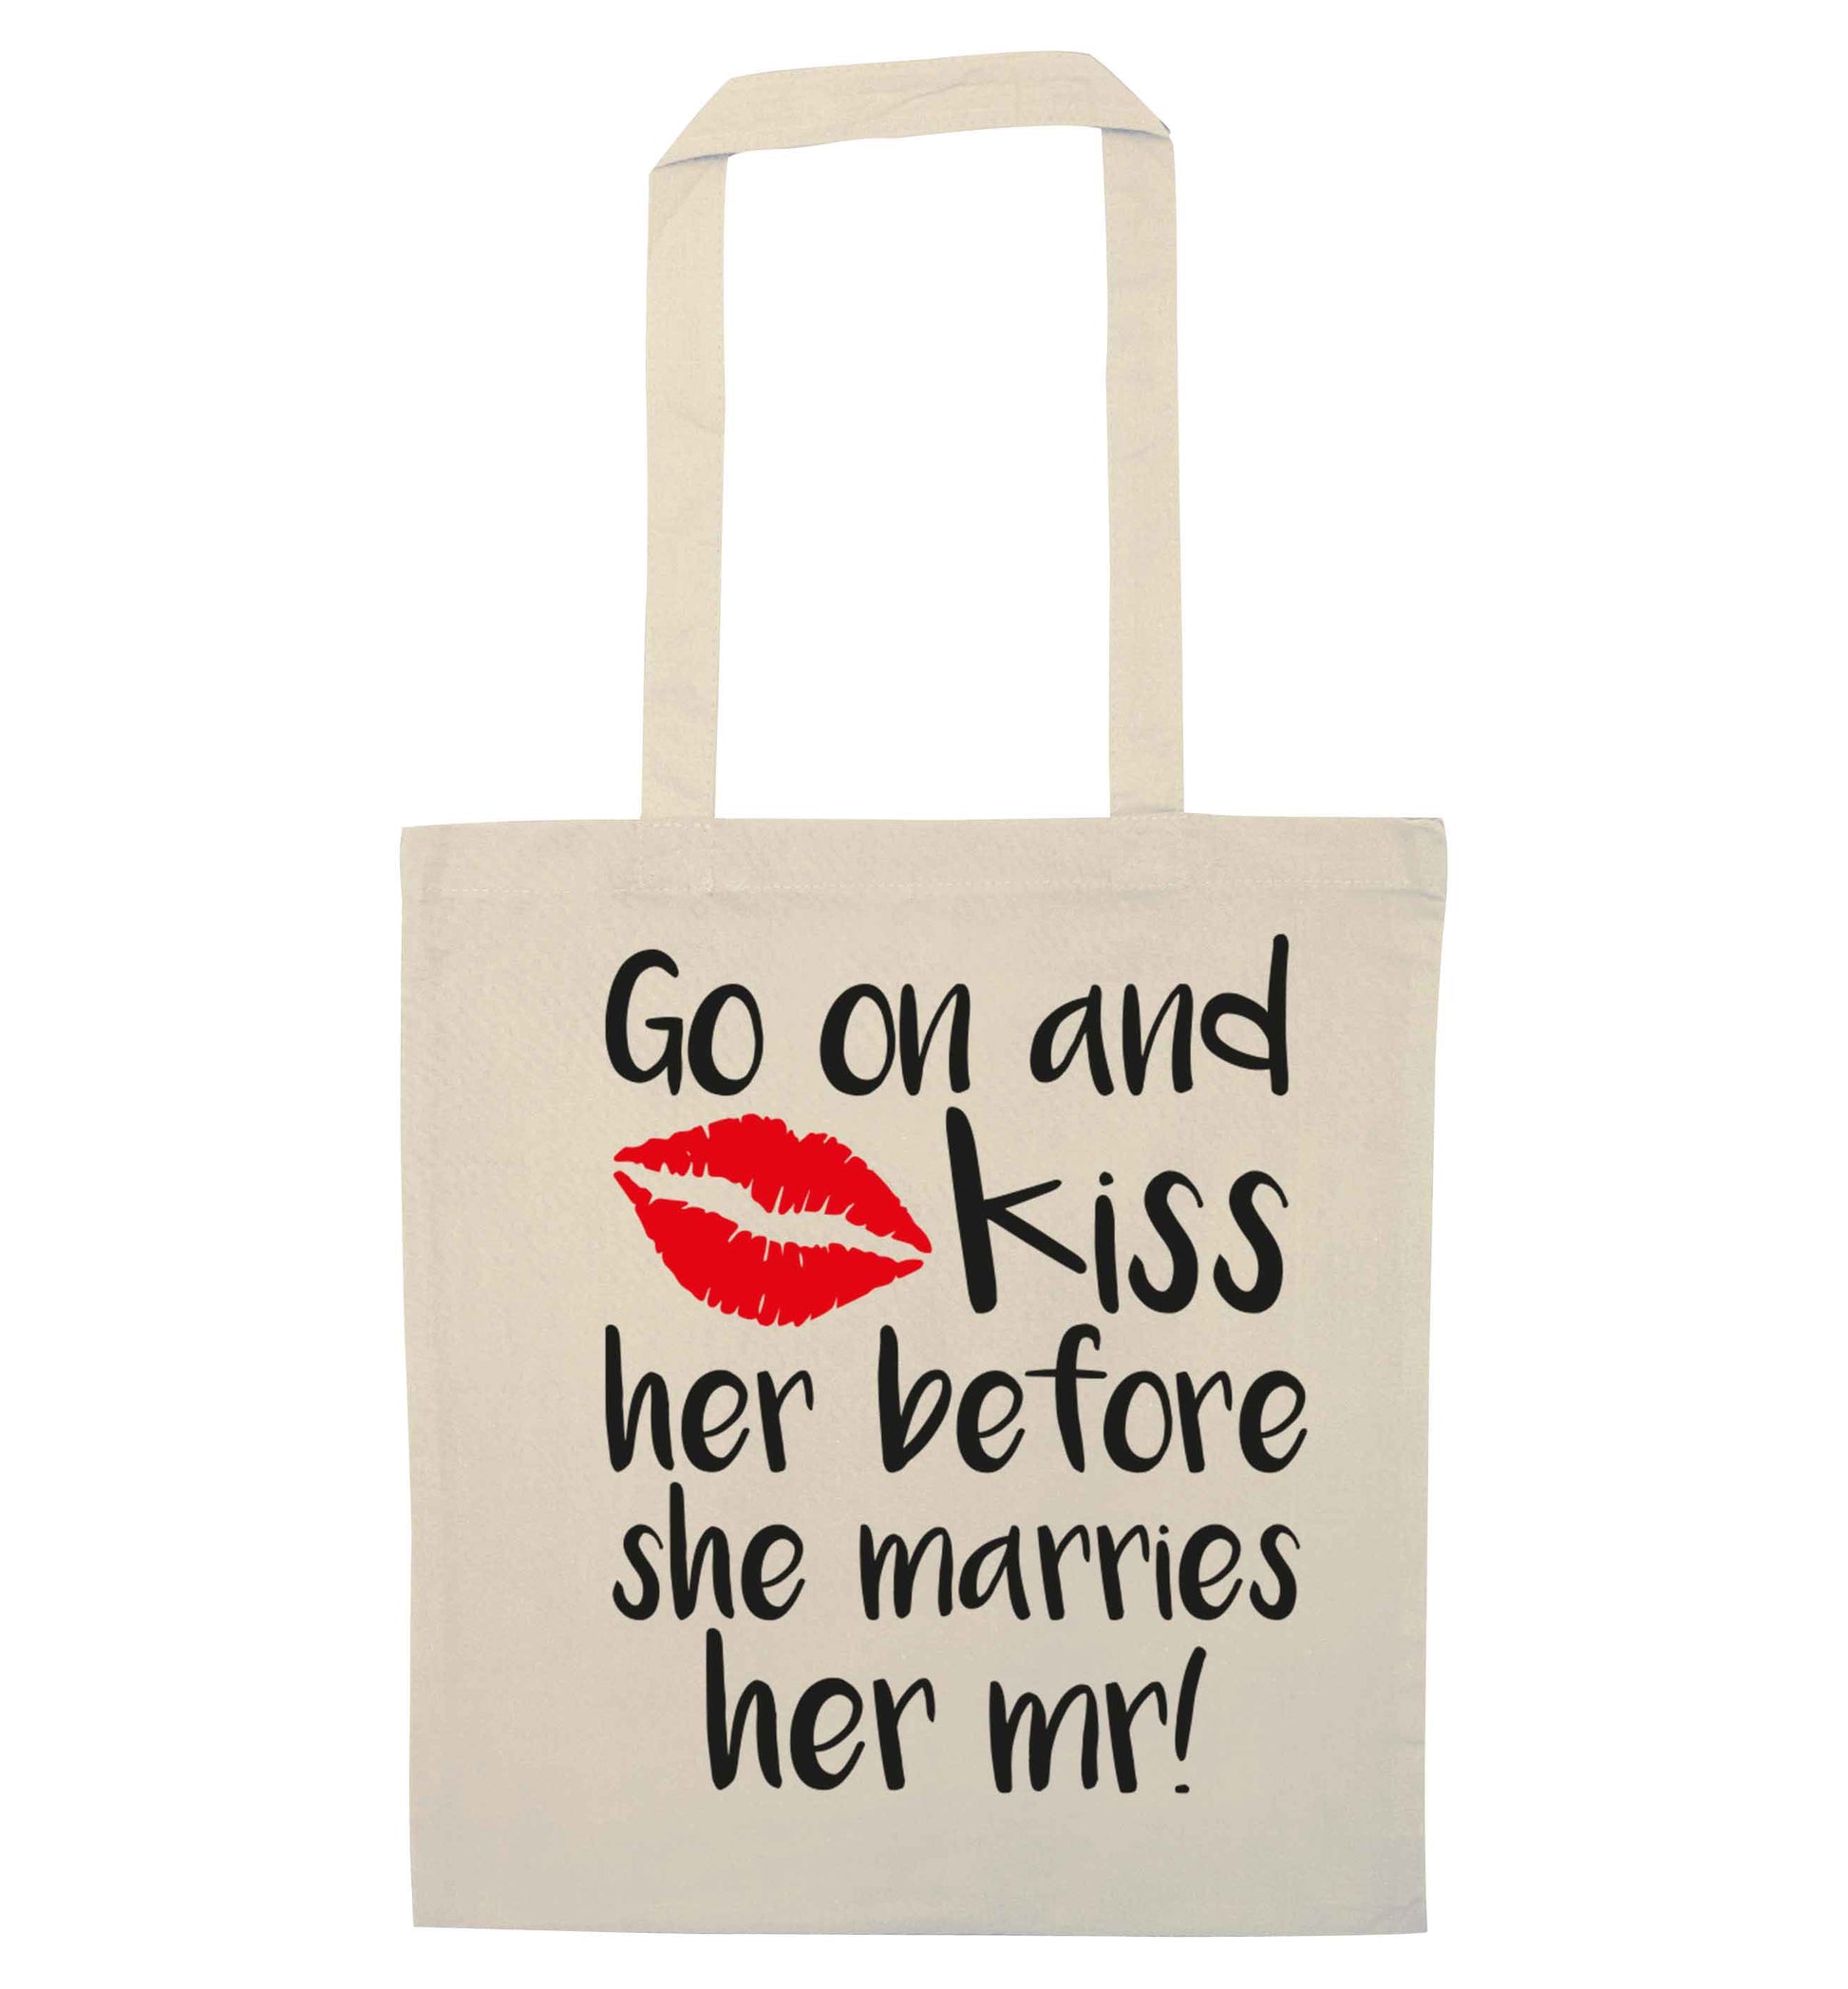 Kiss her before she marries her mr! natural tote bag